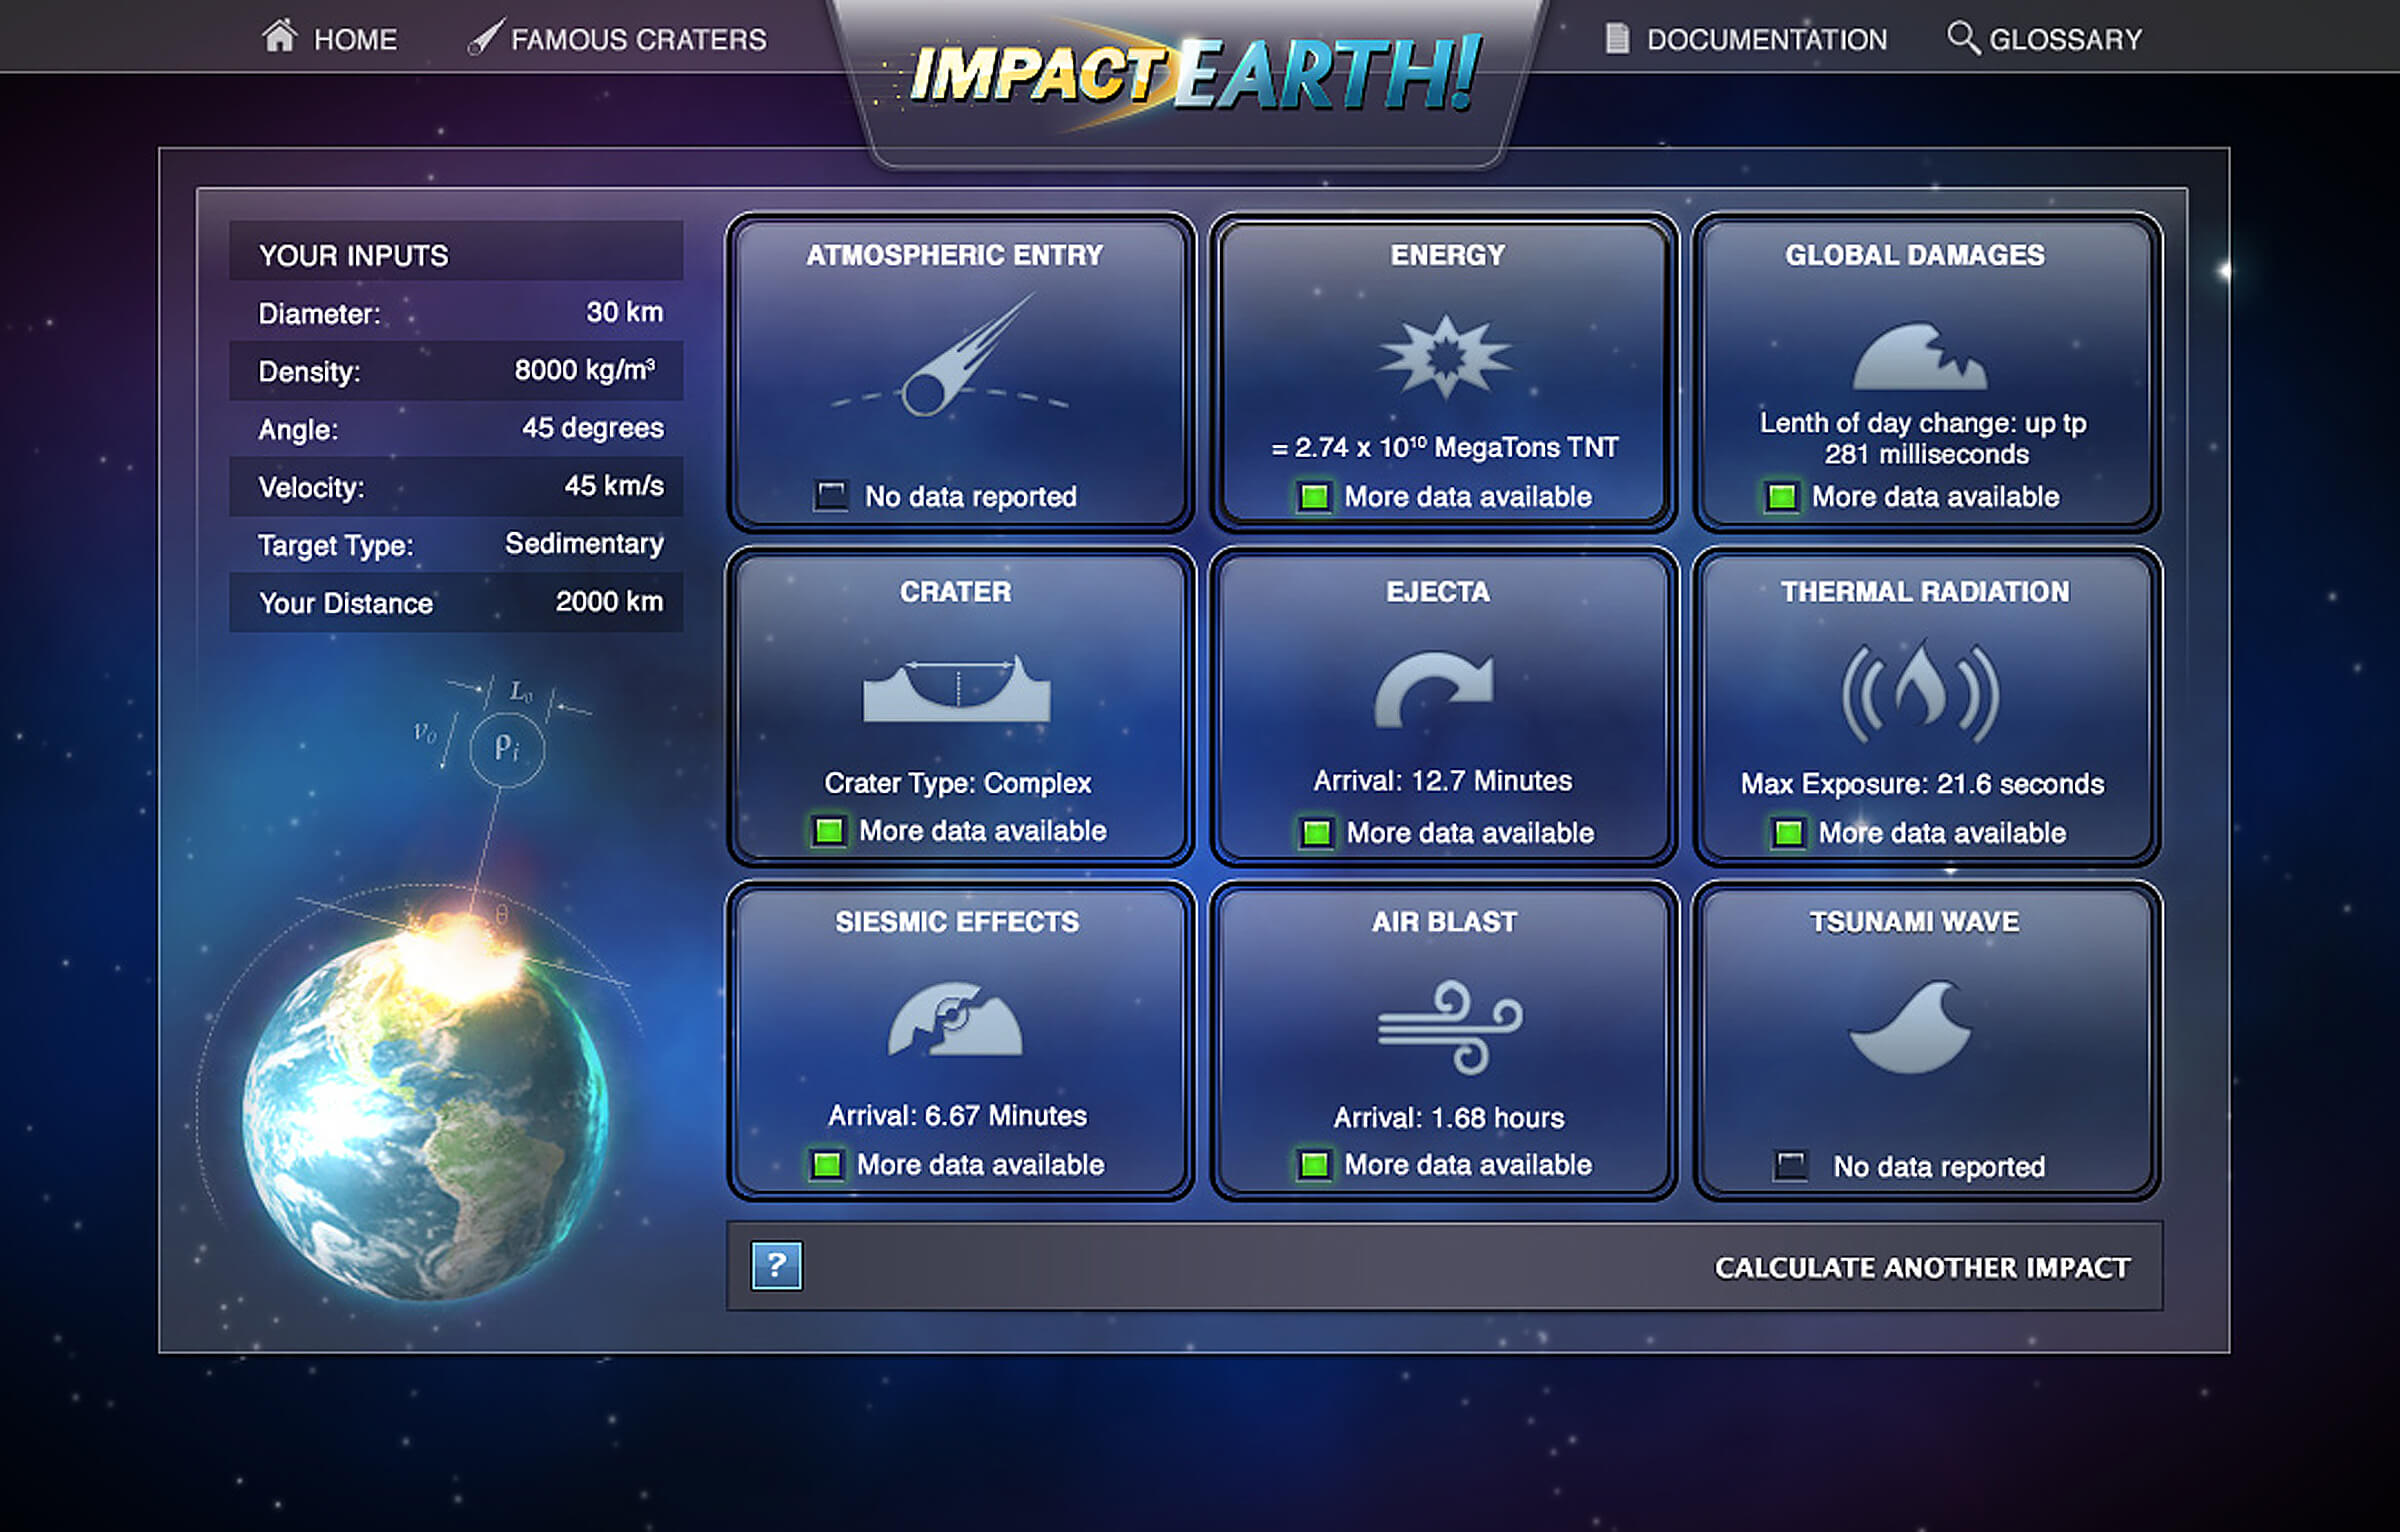 Purdue unveils 'Impact: Earth!' asteroid impact effects calculator2400 x 1532